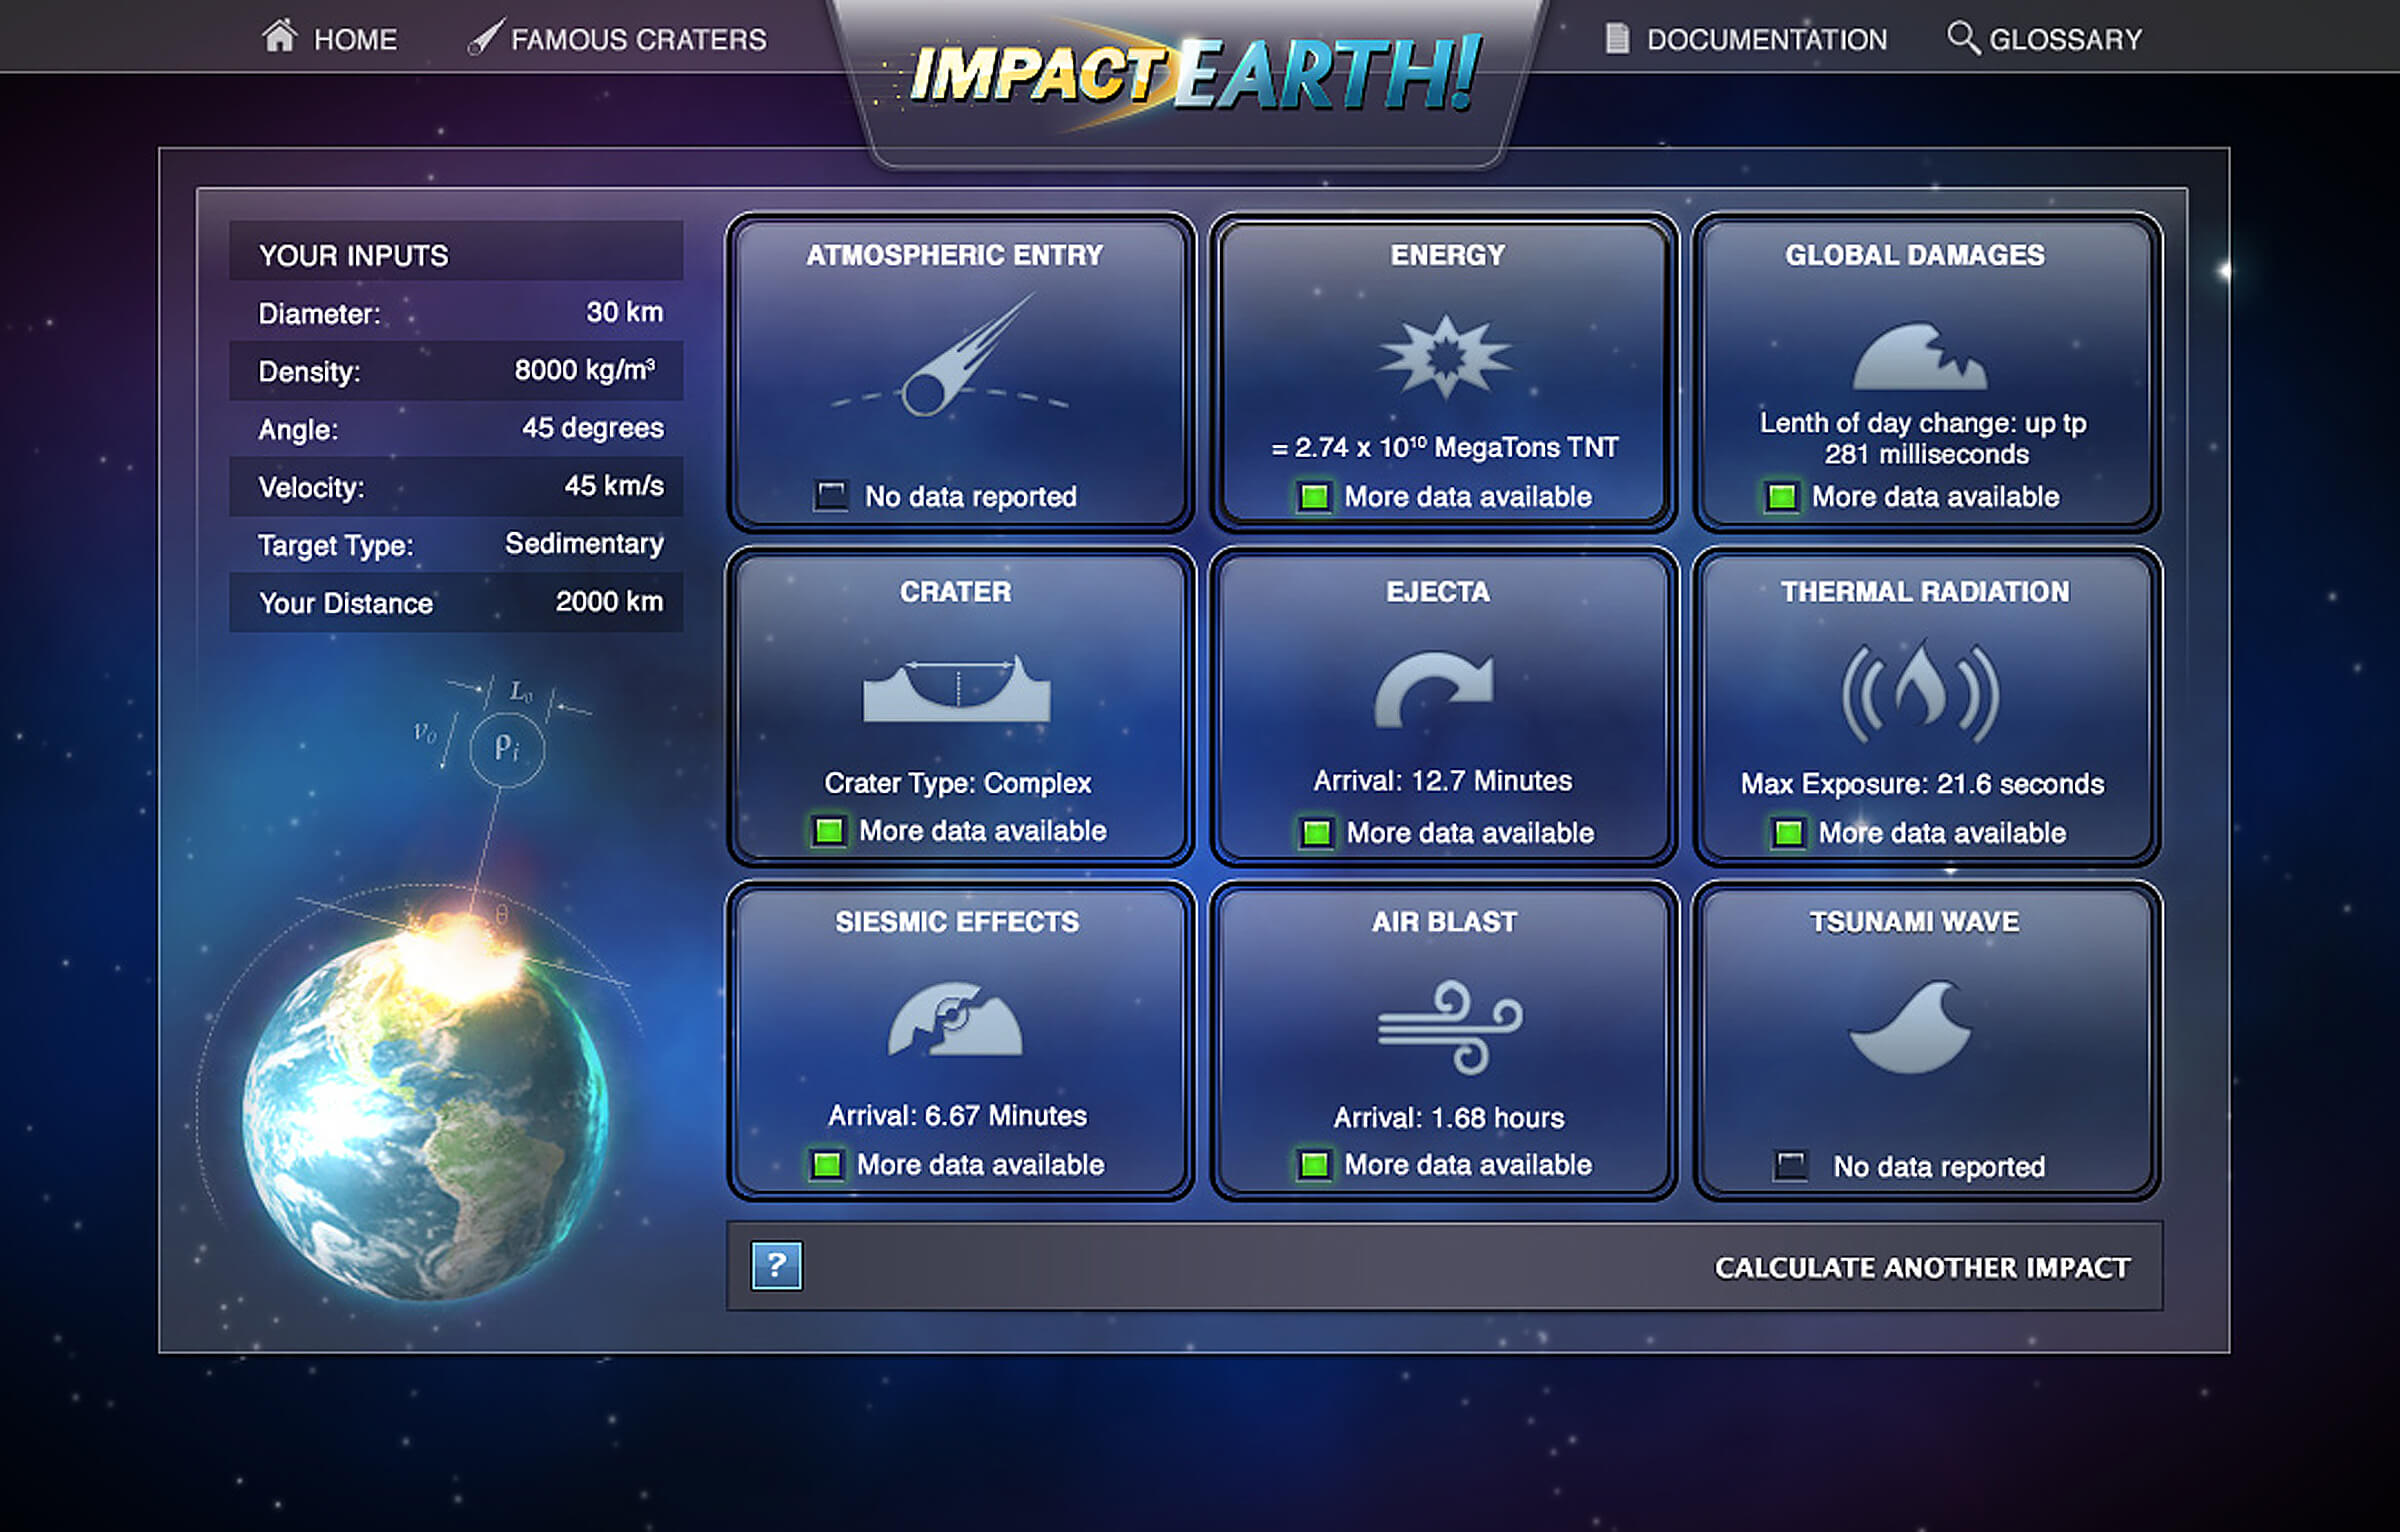 Purdue unveils 'Impact: Earth!' asteroid impact effects calculator2400 x 1532